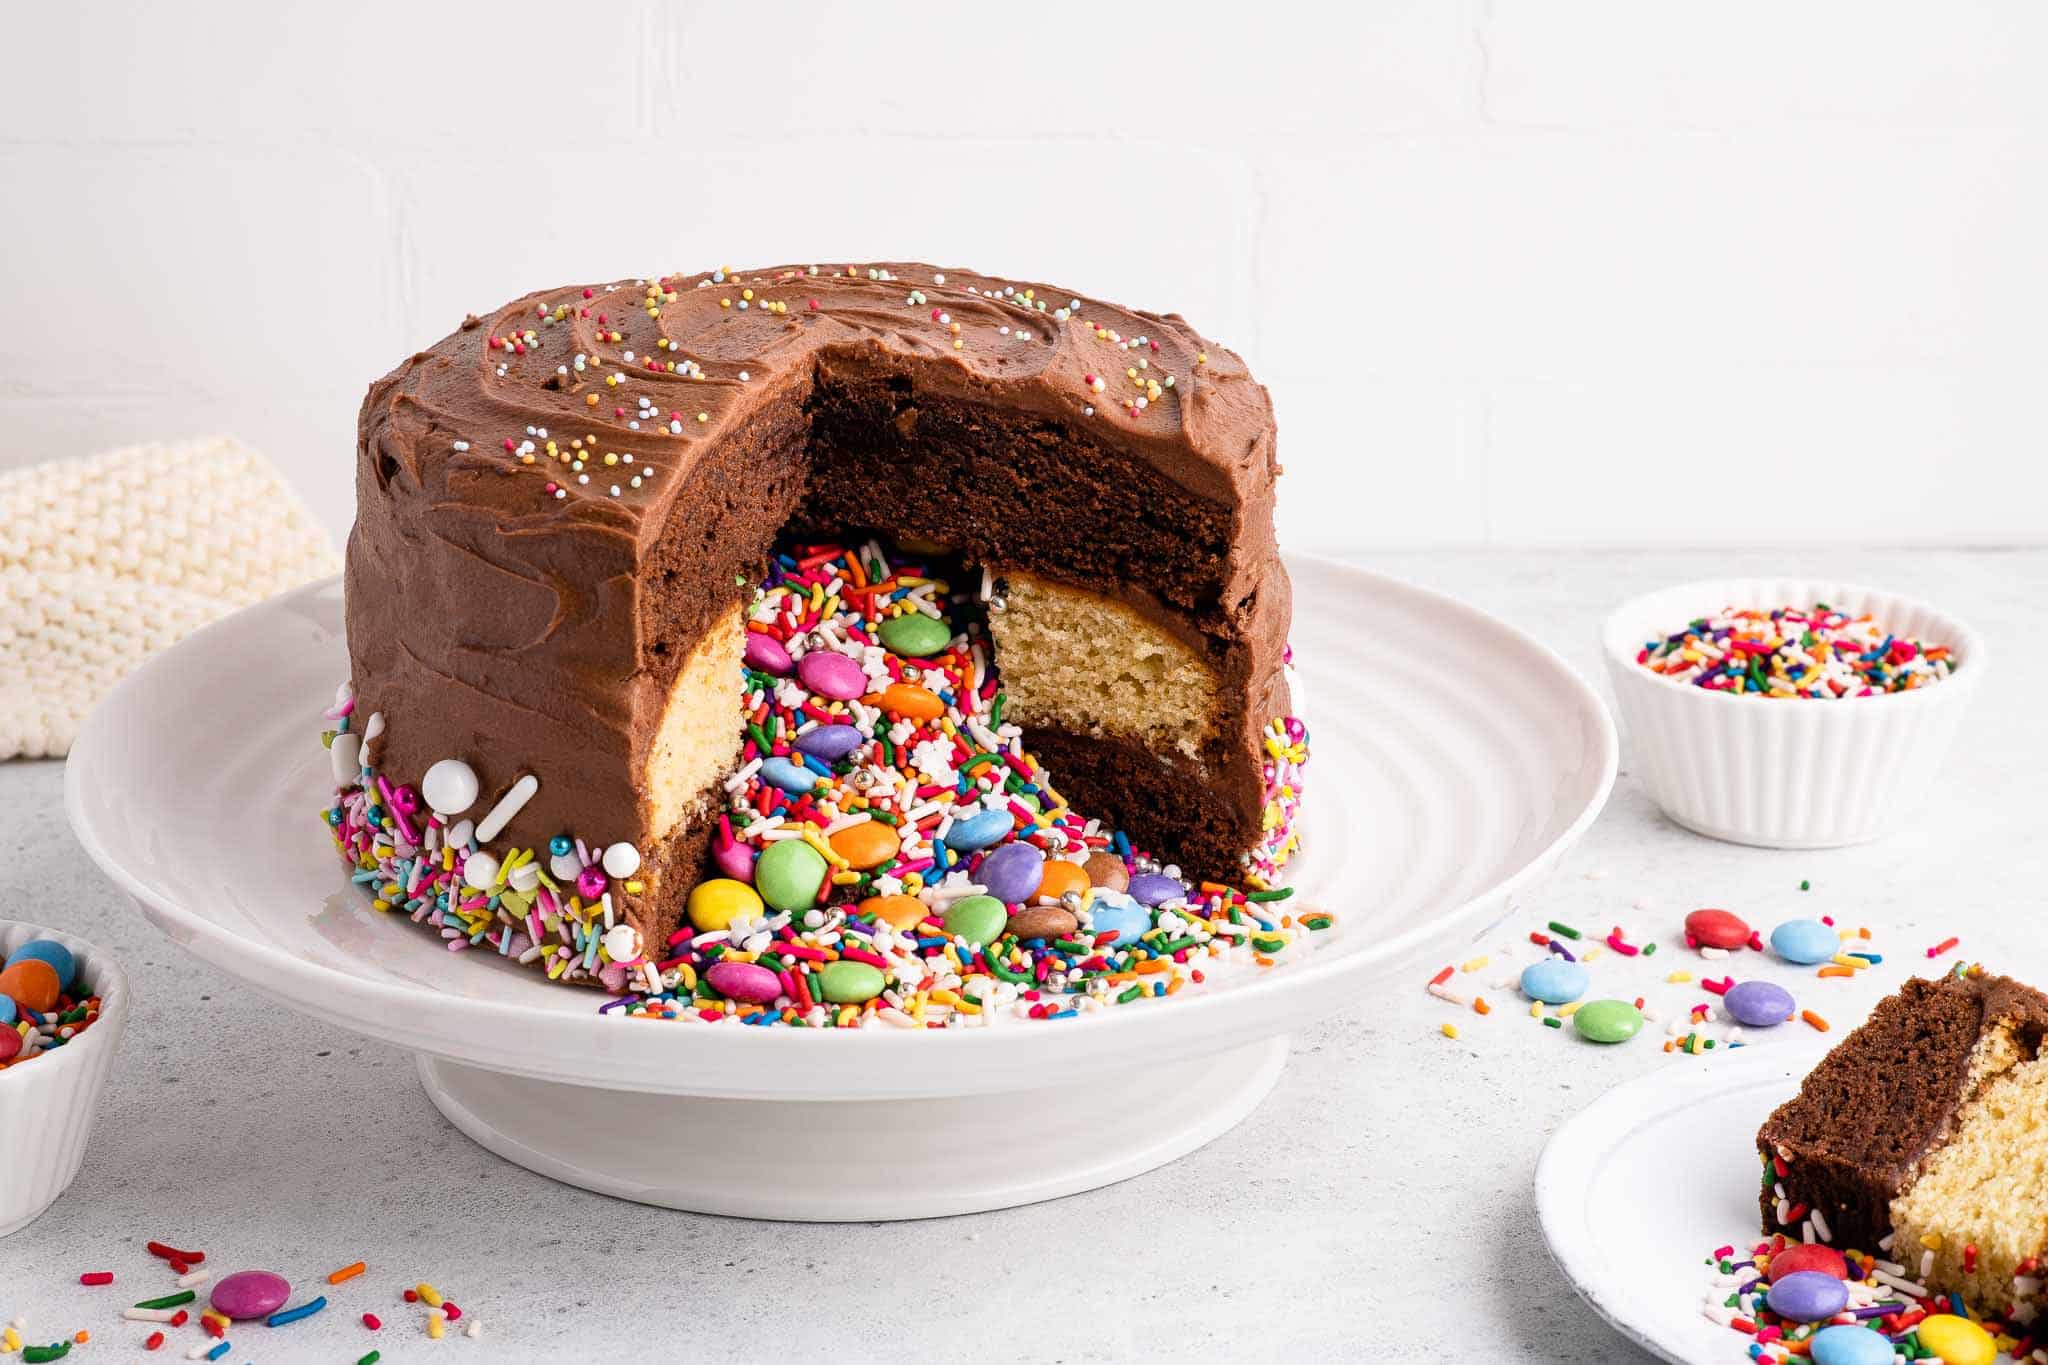 piñata cake filled with smarties and sprinkles on white cake plate